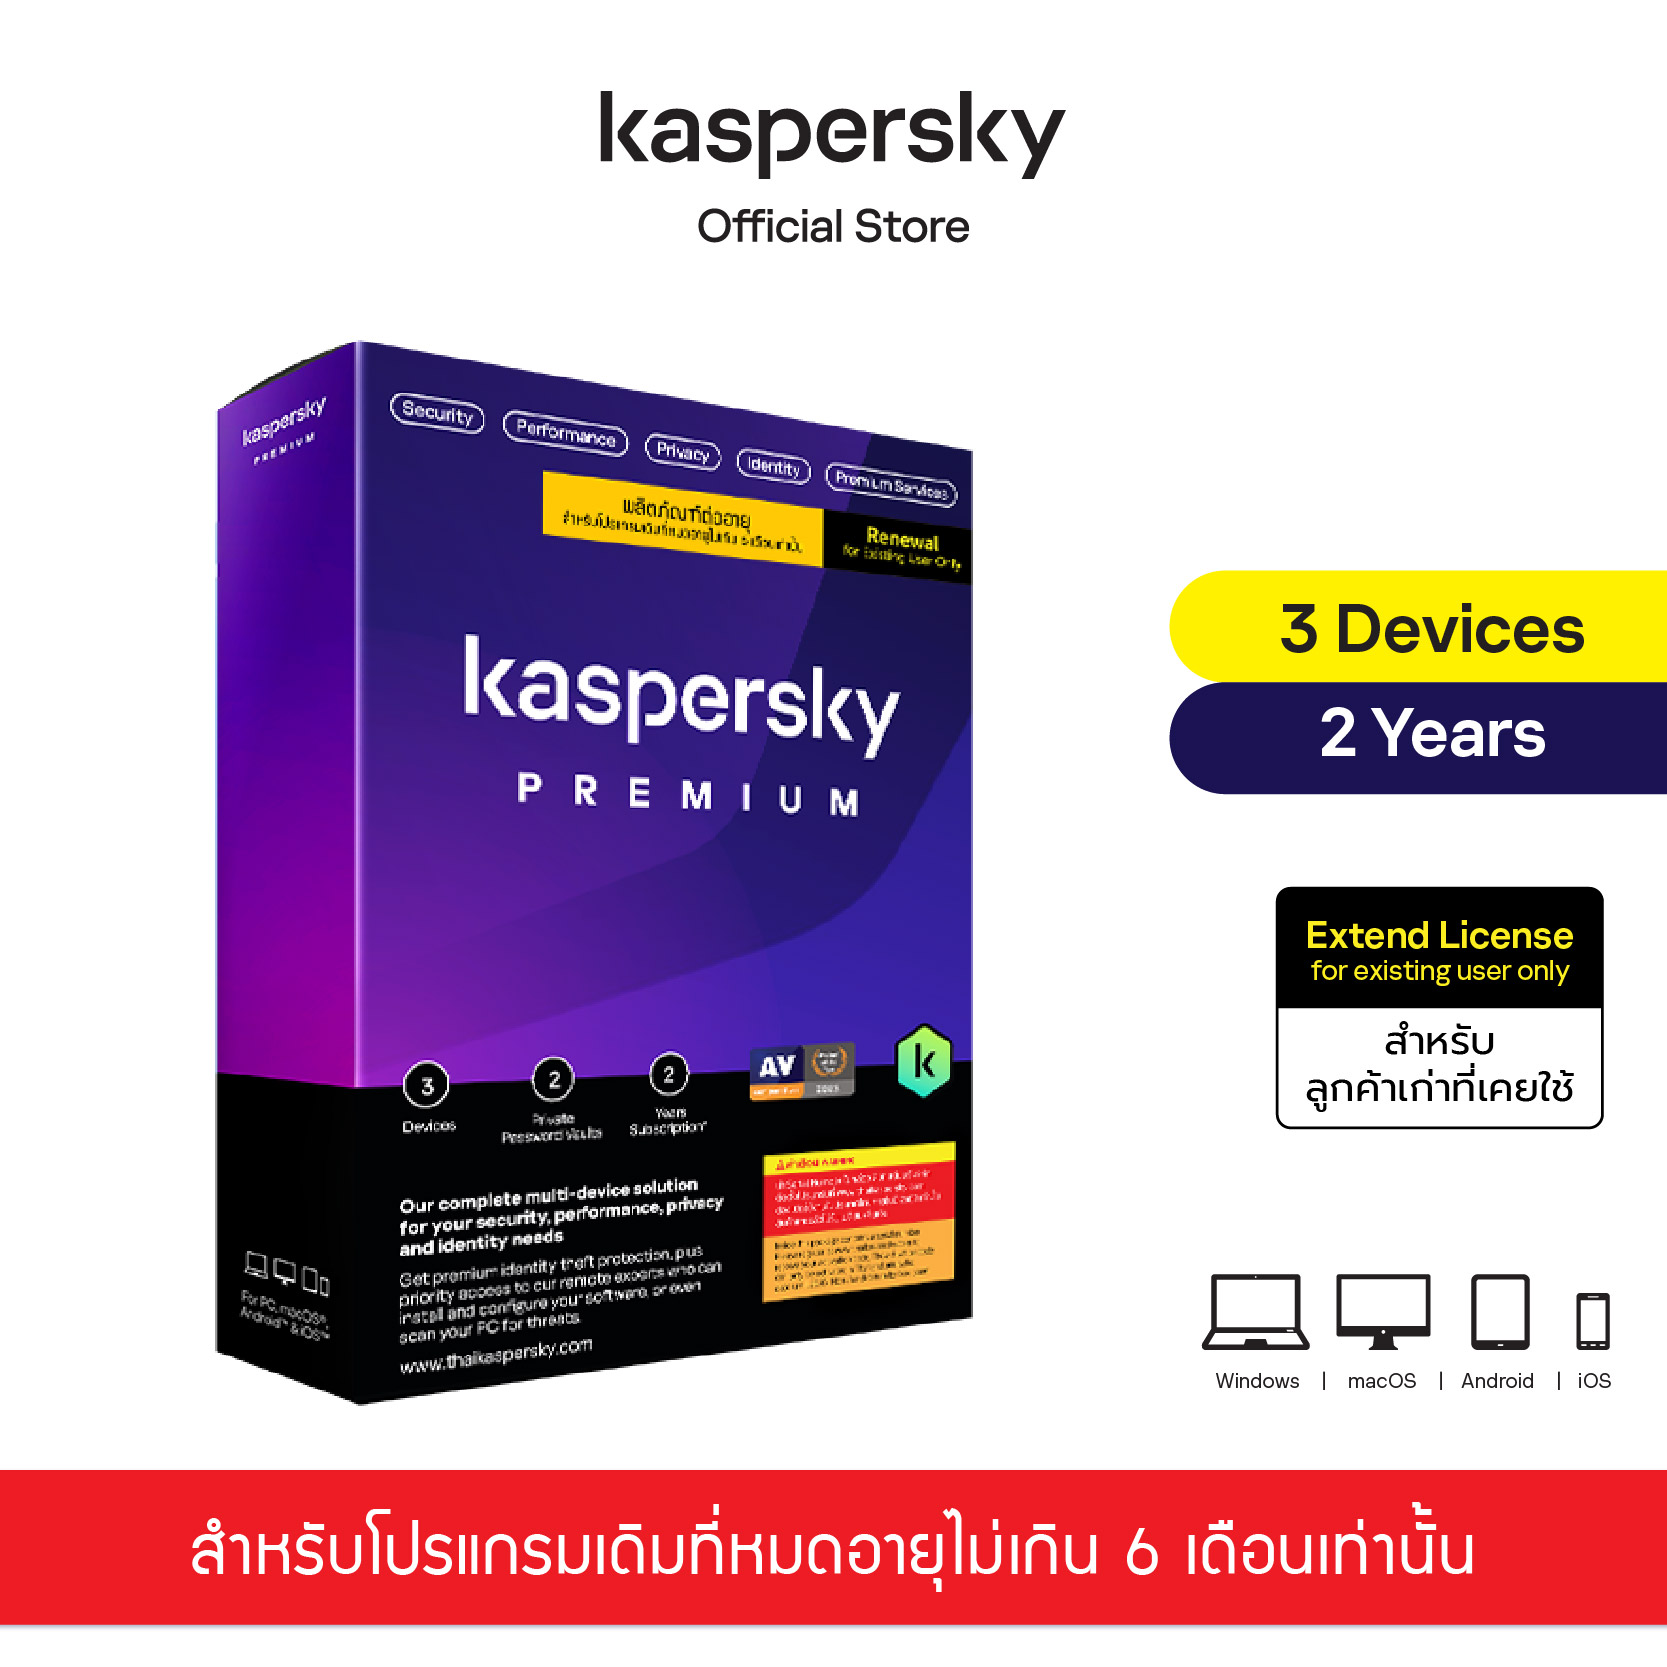 Kaspersky Premium 3 Devices 2 Year (Extend License)